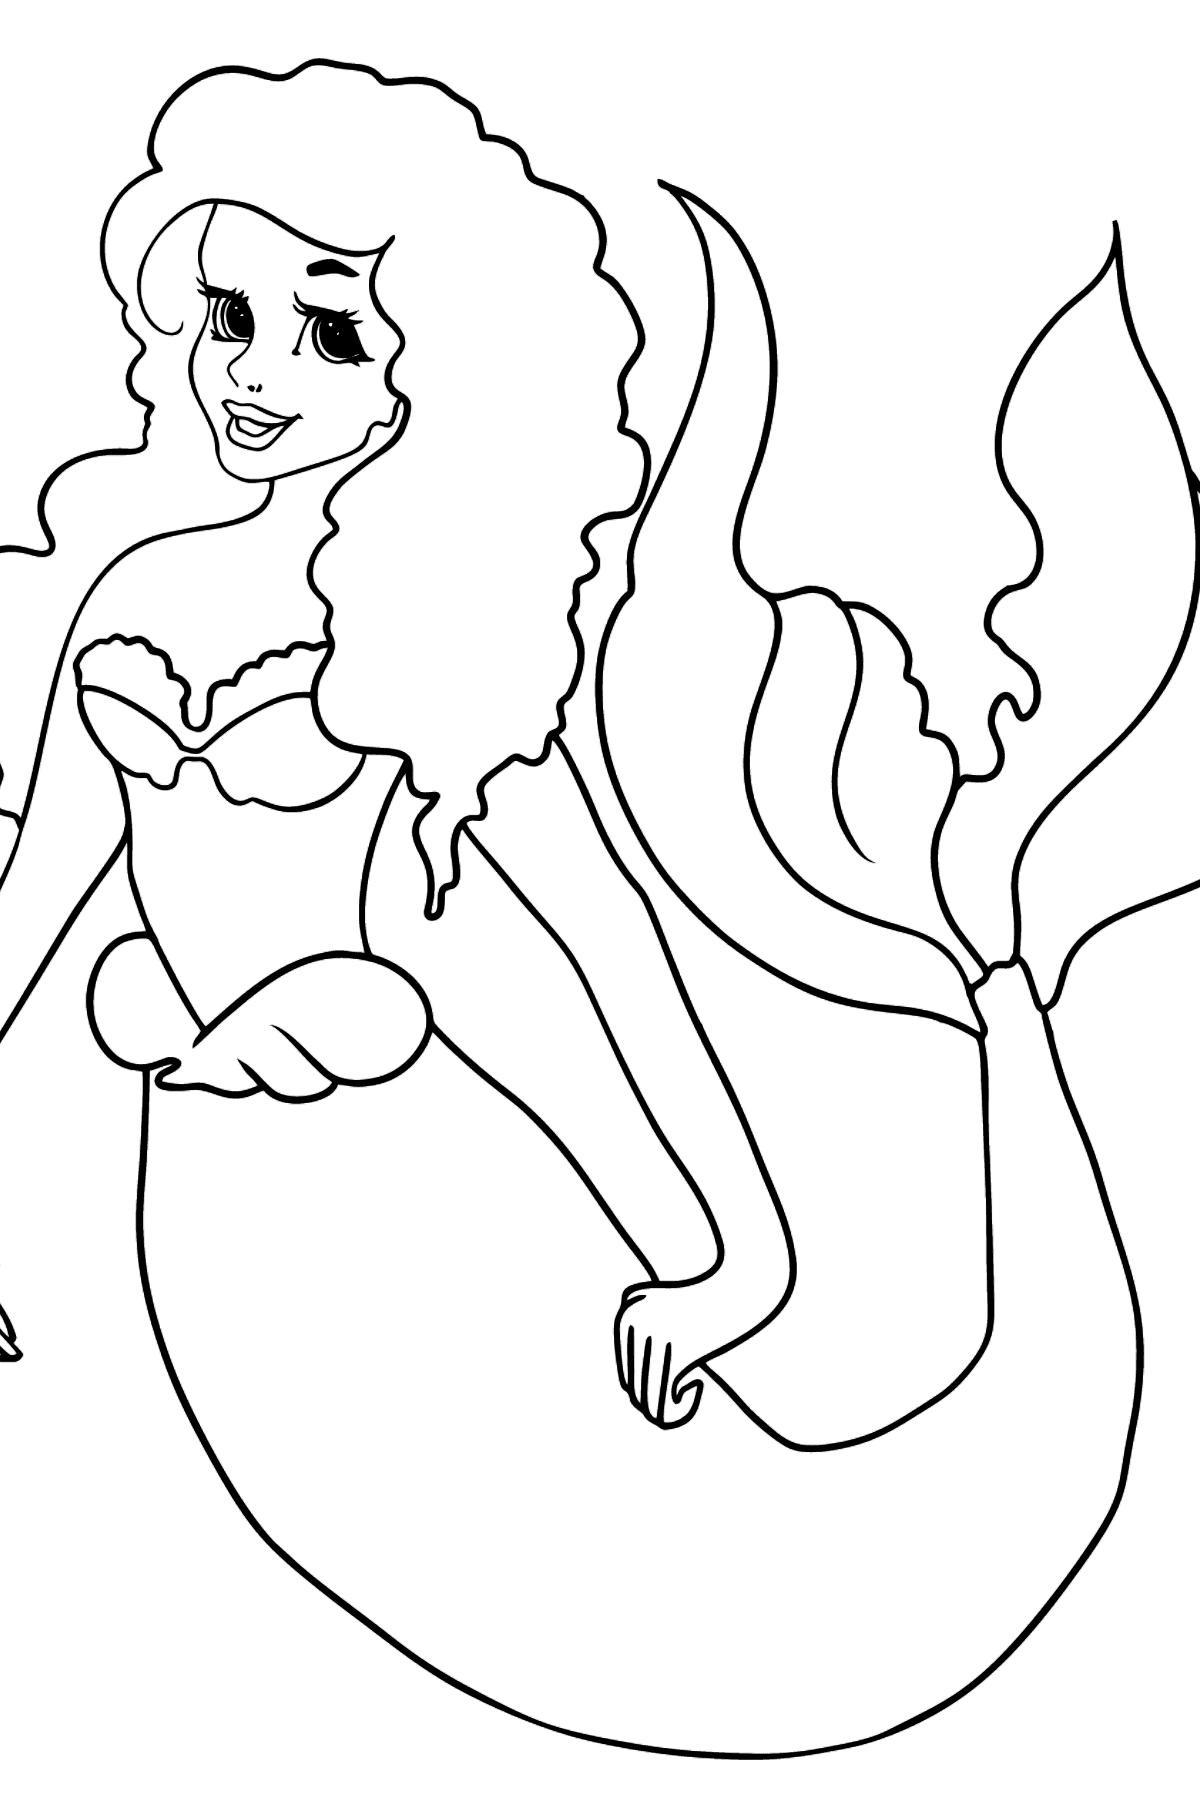 Coloring Page Mermaid with green tail - Coloring Pages for Kids